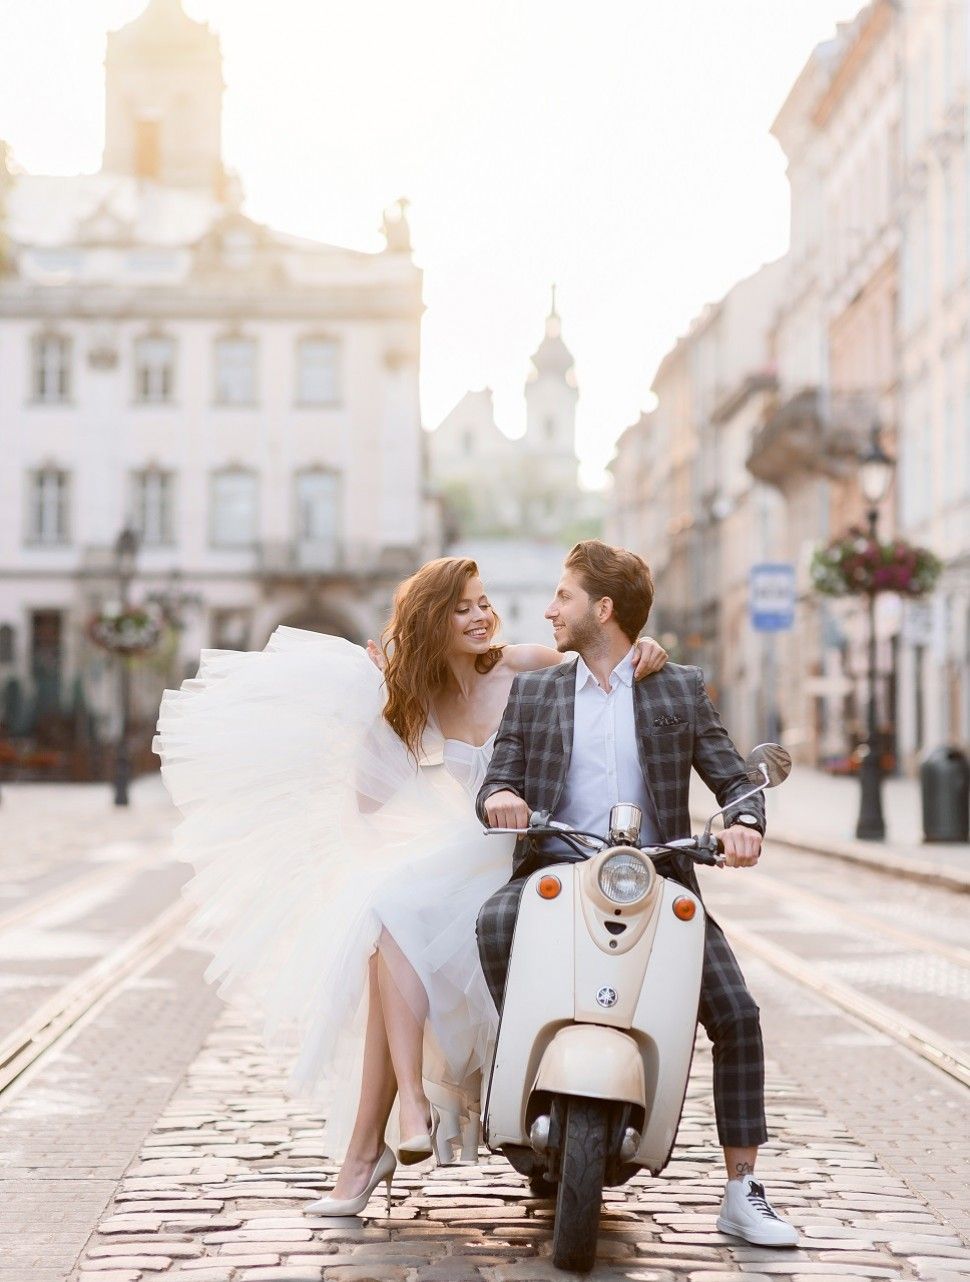 Top 5 Dreamy Destinations: The Best Cities for a Honeymoon